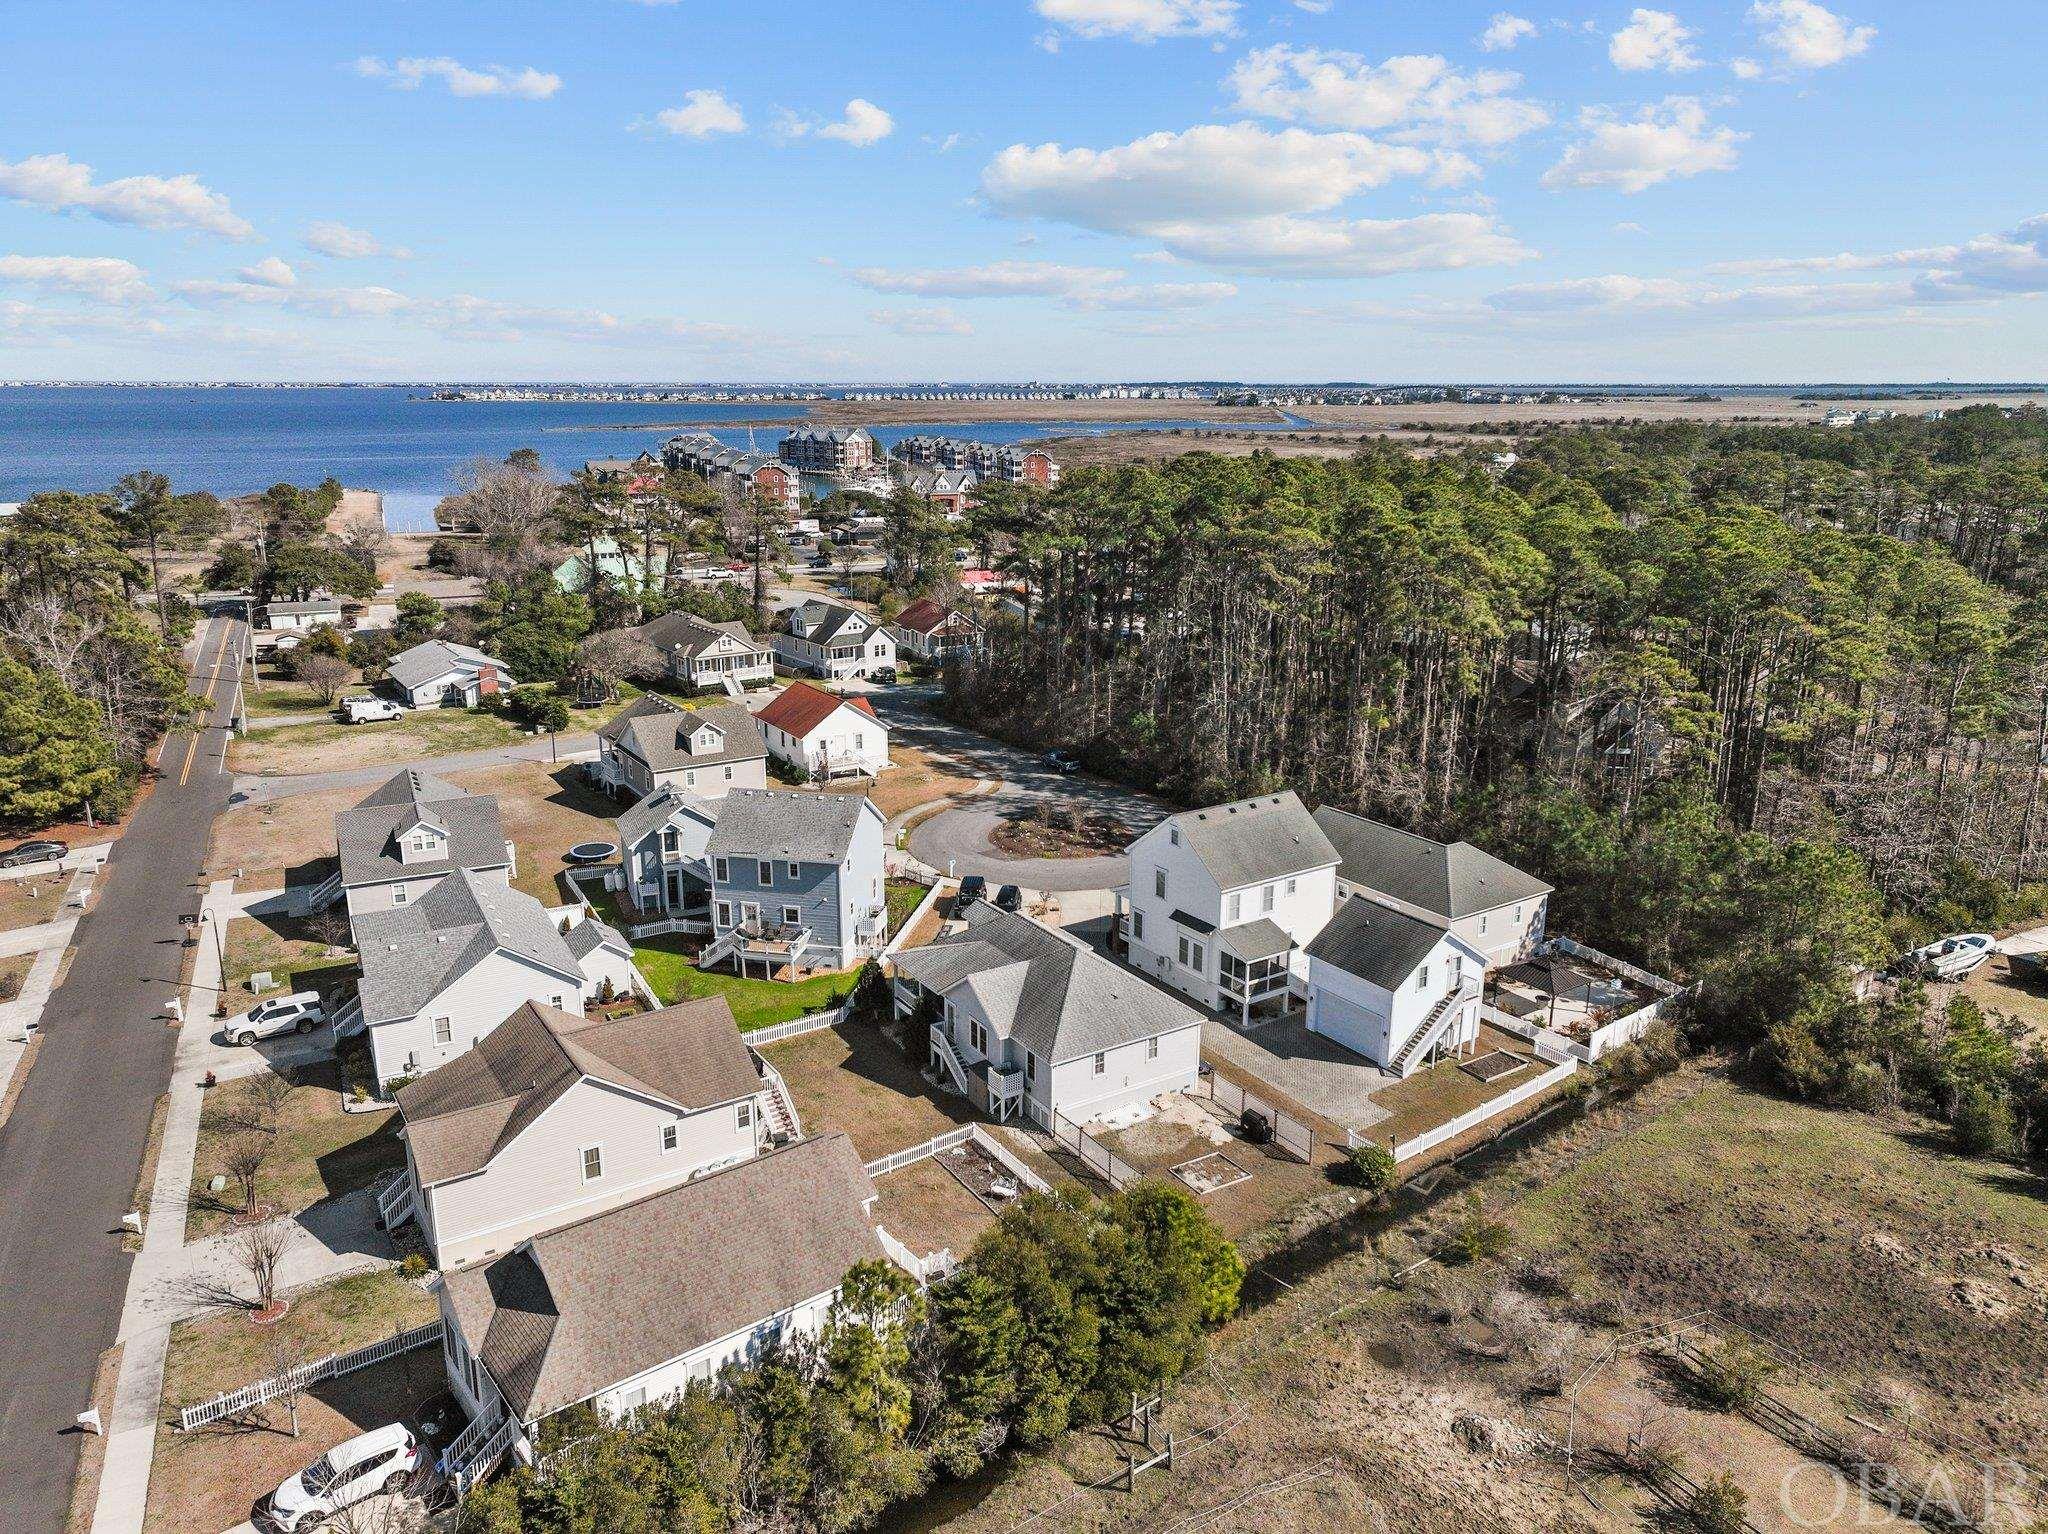 103 Flats Court, Manteo, NC 27954, 3 Bedrooms Bedrooms, ,2 BathroomsBathrooms,Residential,For sale,Flats Court,124682